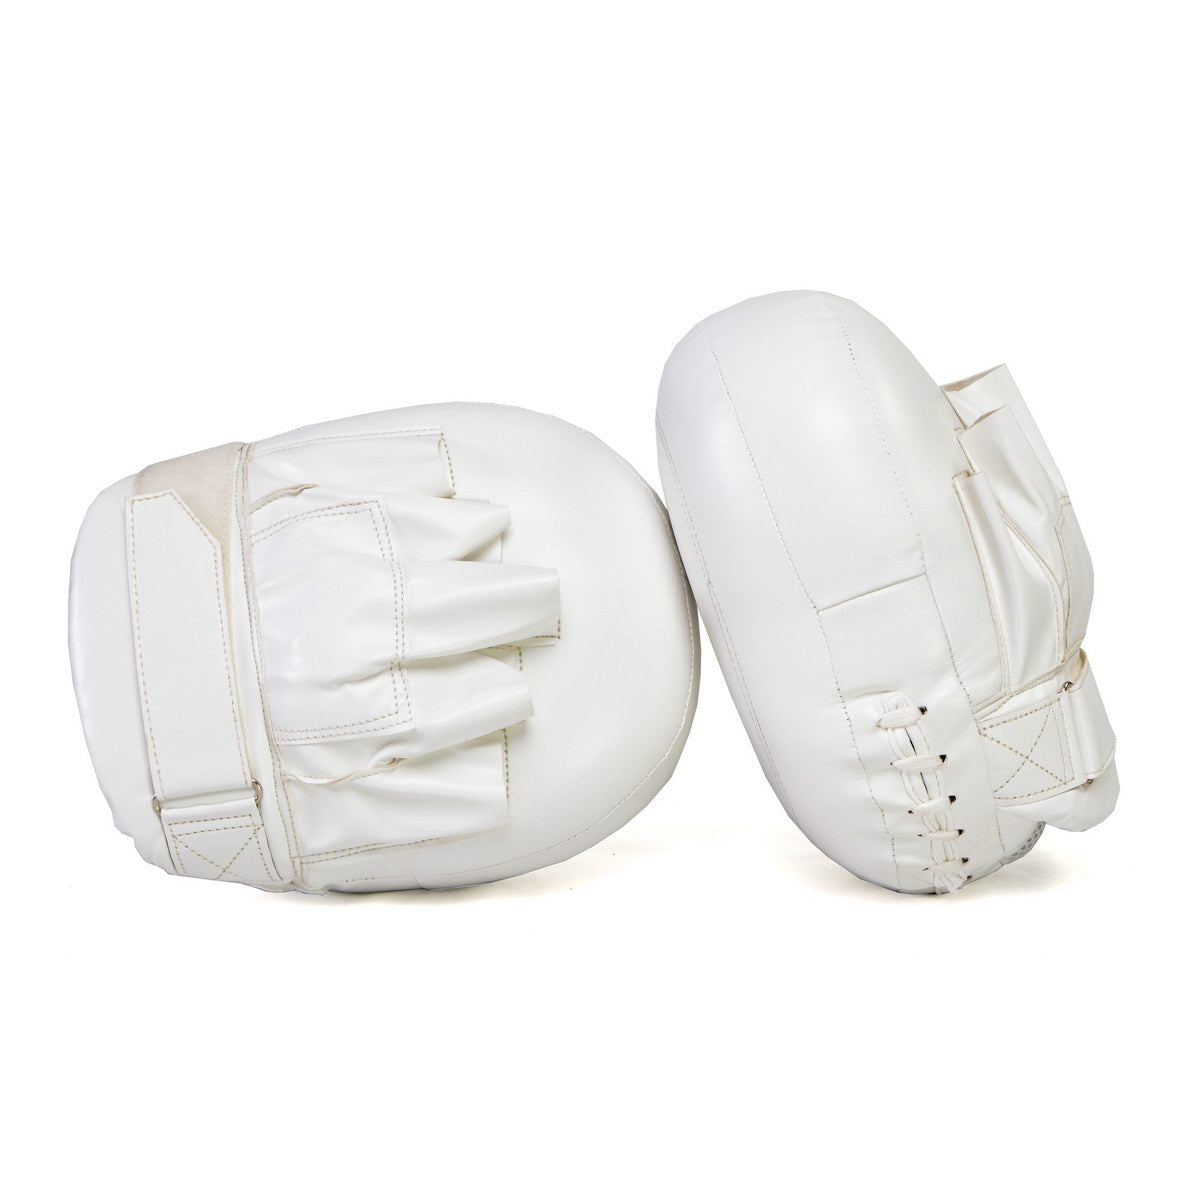 X Fitness XF8001 White Punch Focus Mitts for Boxing, MMA, Kickboxing, Muay Thai - Pair